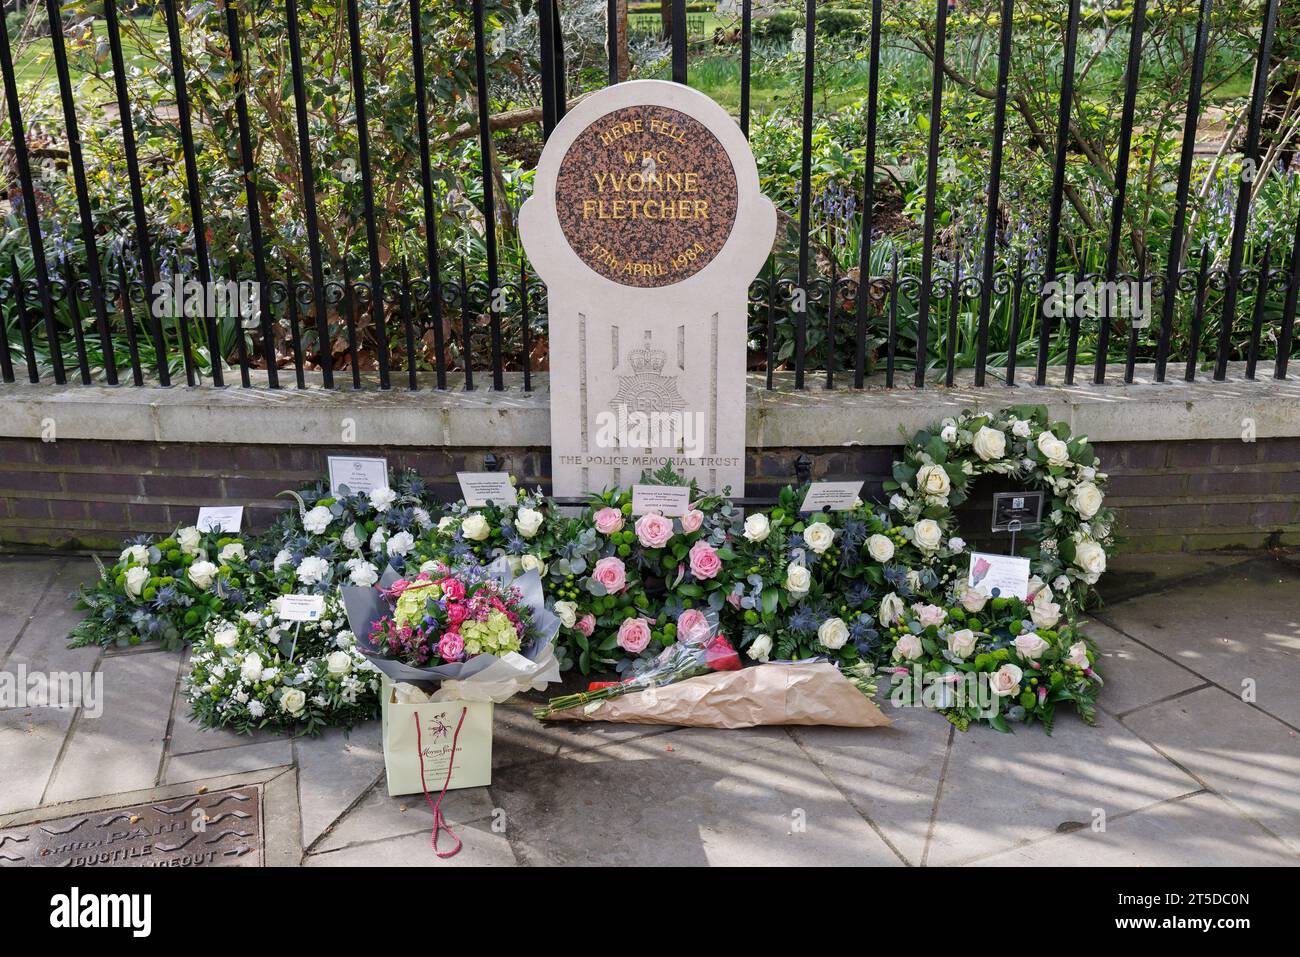 On 17 April, campaigner, and former Metropolitan Police Officer John Murray, is holding a memorial service for WPC Yvonne Fletcher who was murdered ou Stock Photo